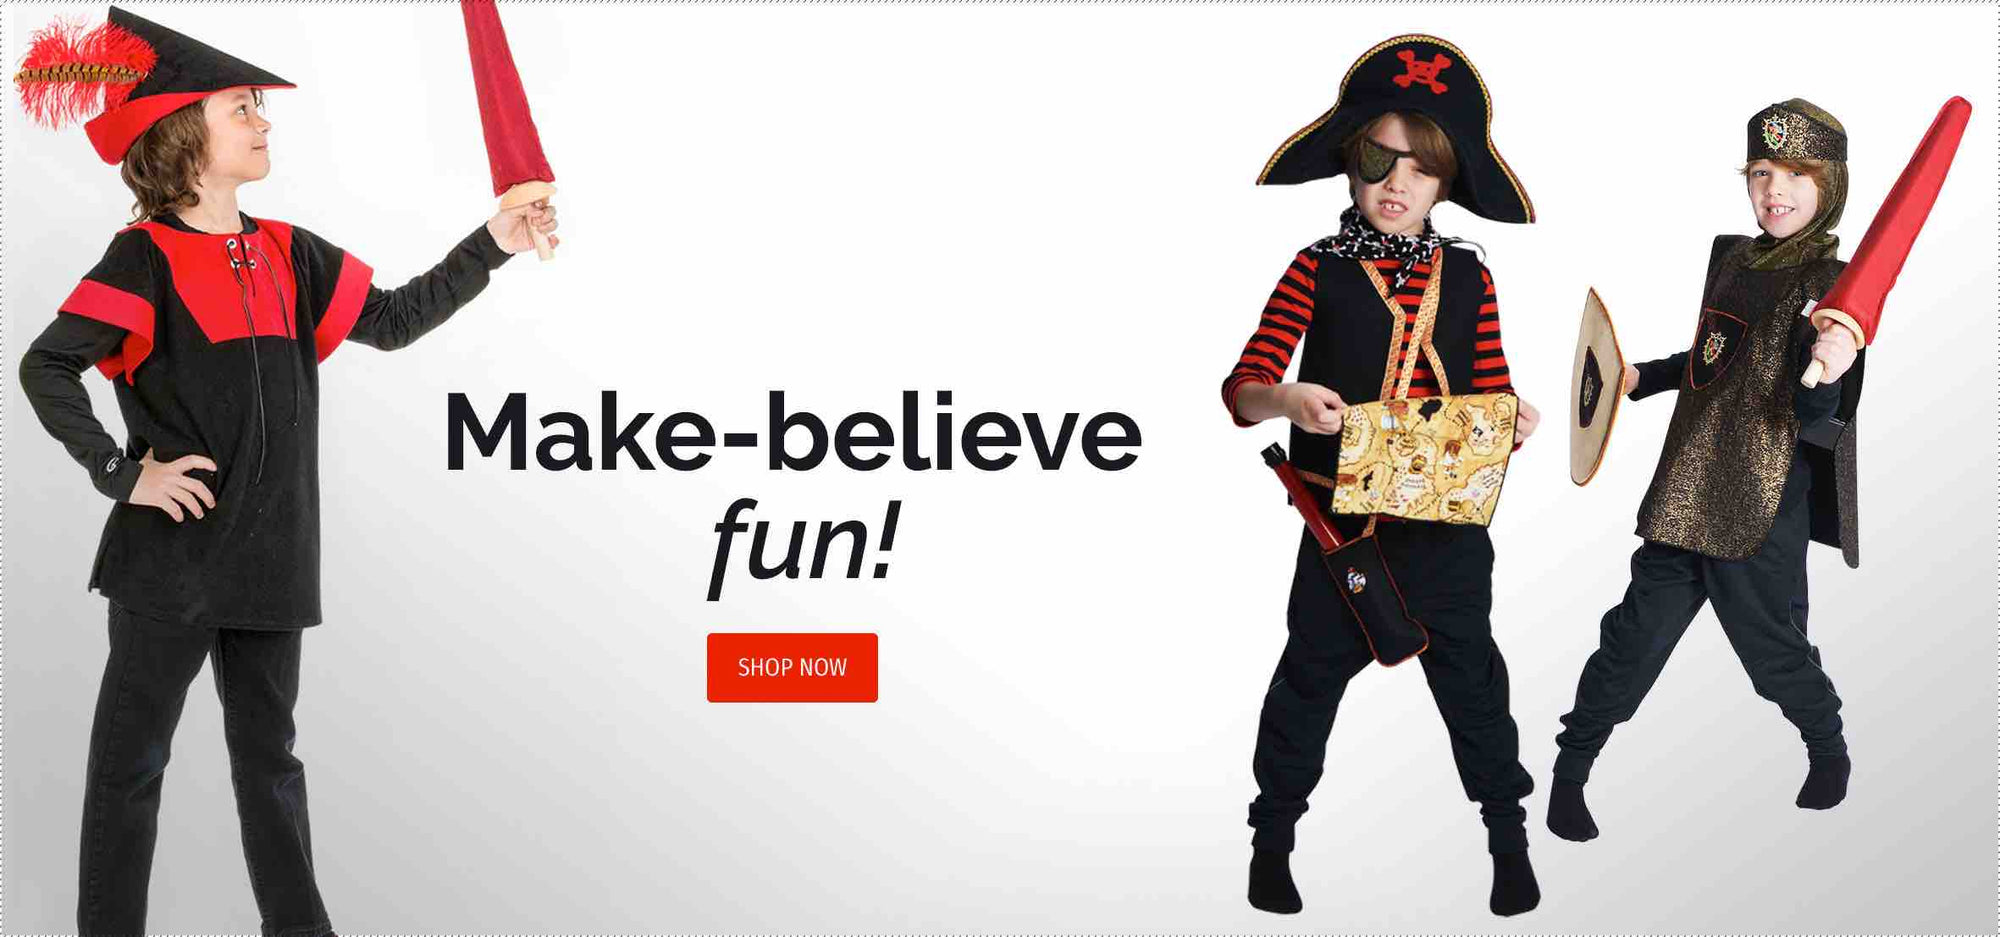 Image of kids wearing robin hood, pirate, and knight costumes. Text reads: Make-believe fun!